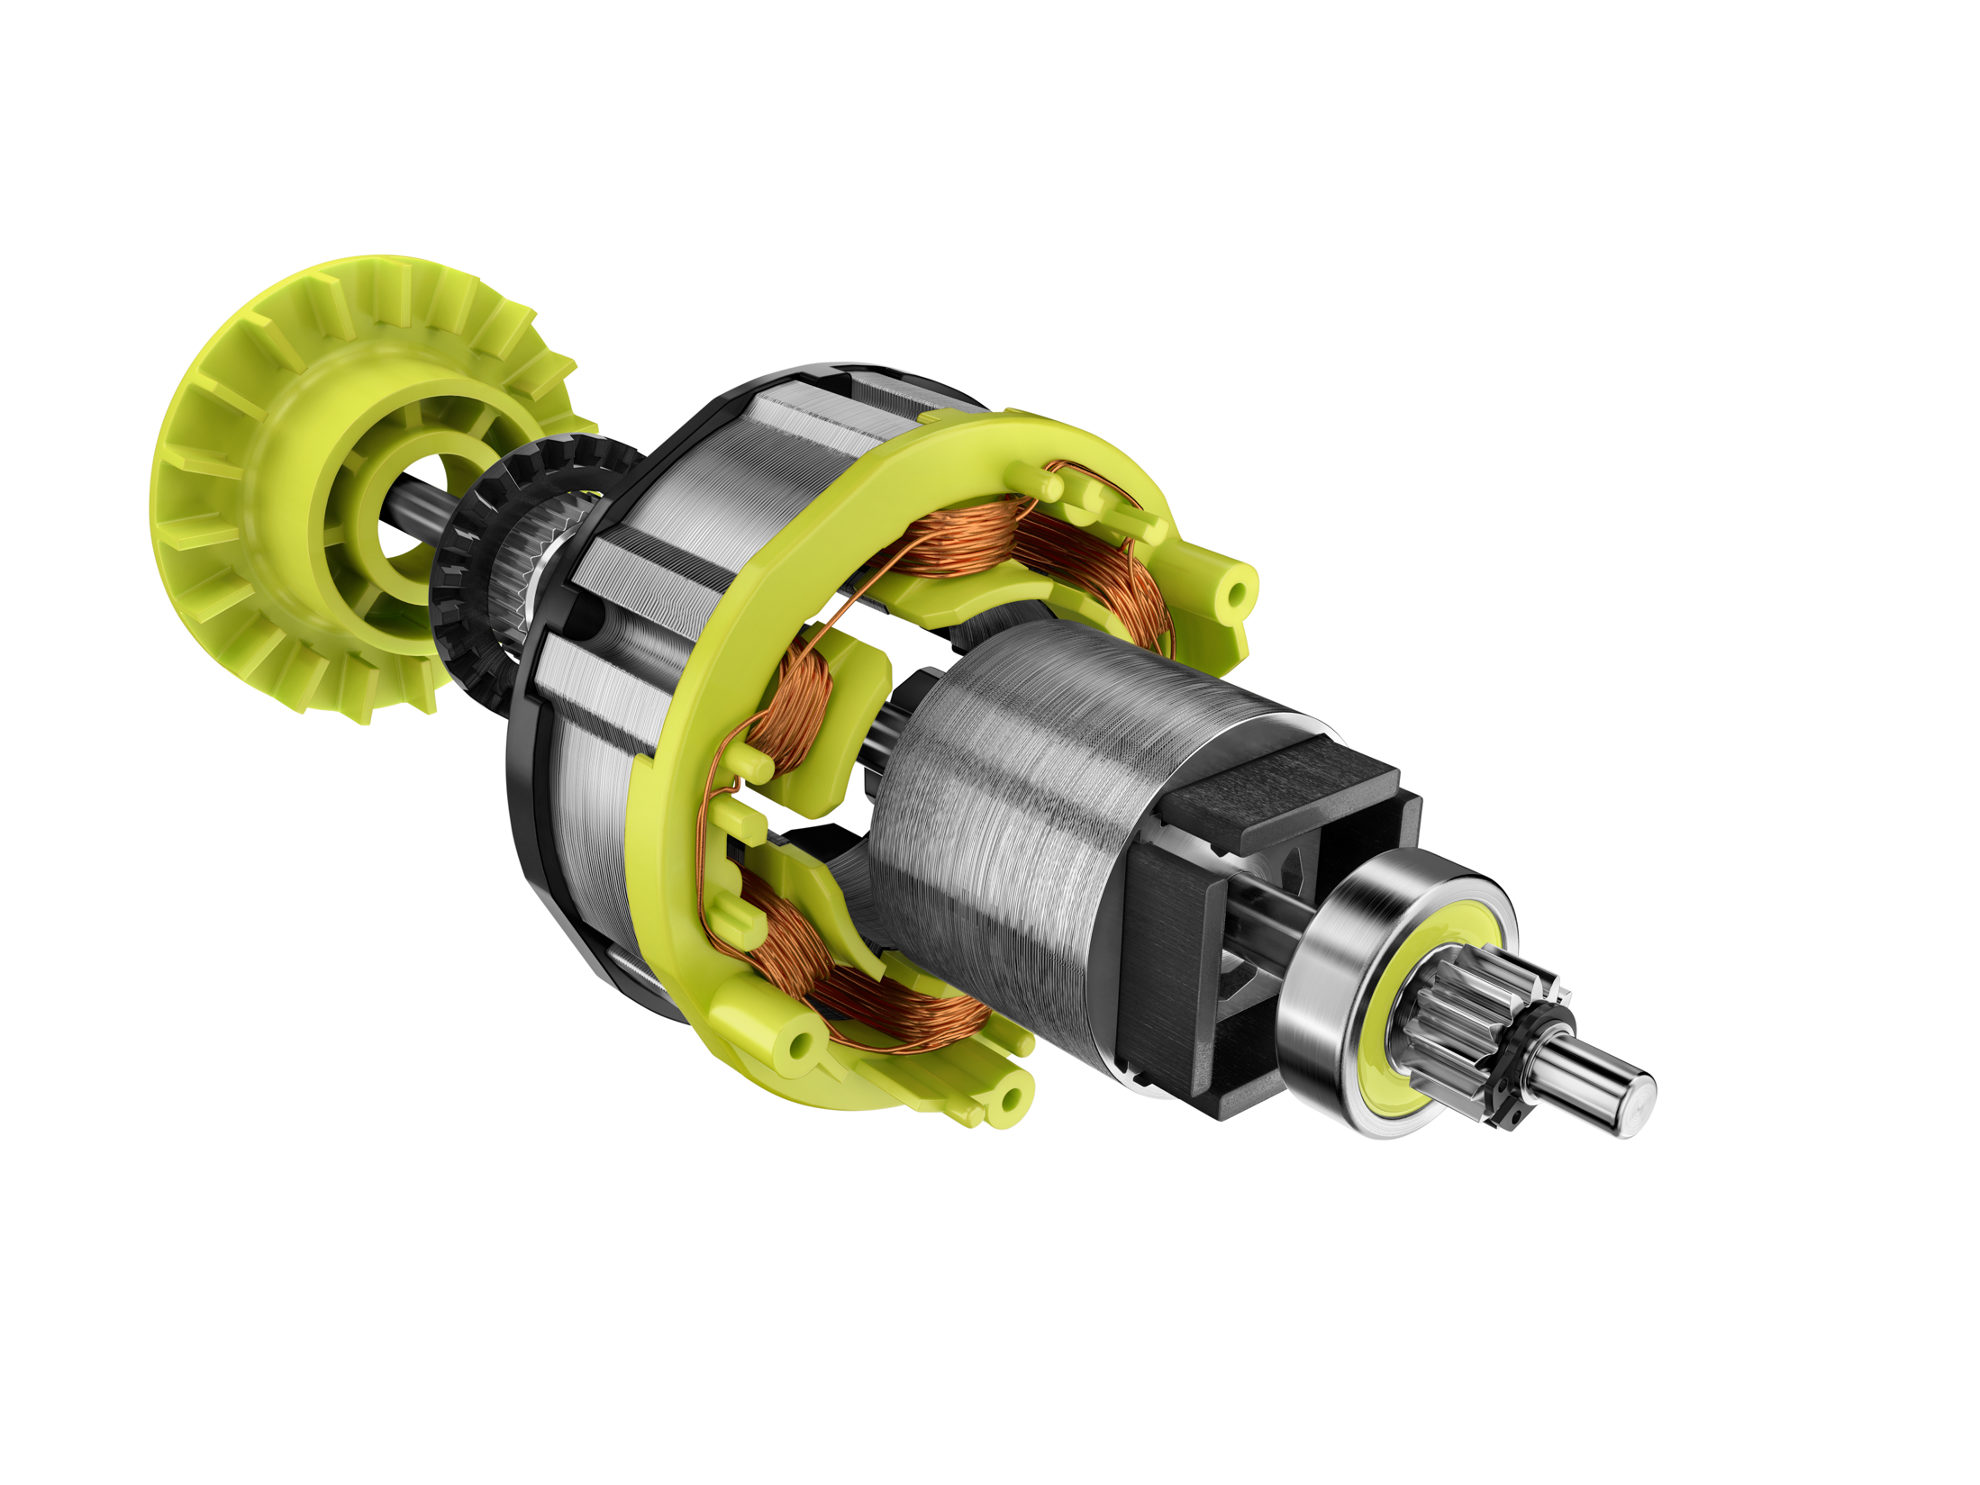 Brushless Motor Combined with ONE+ HP Technology